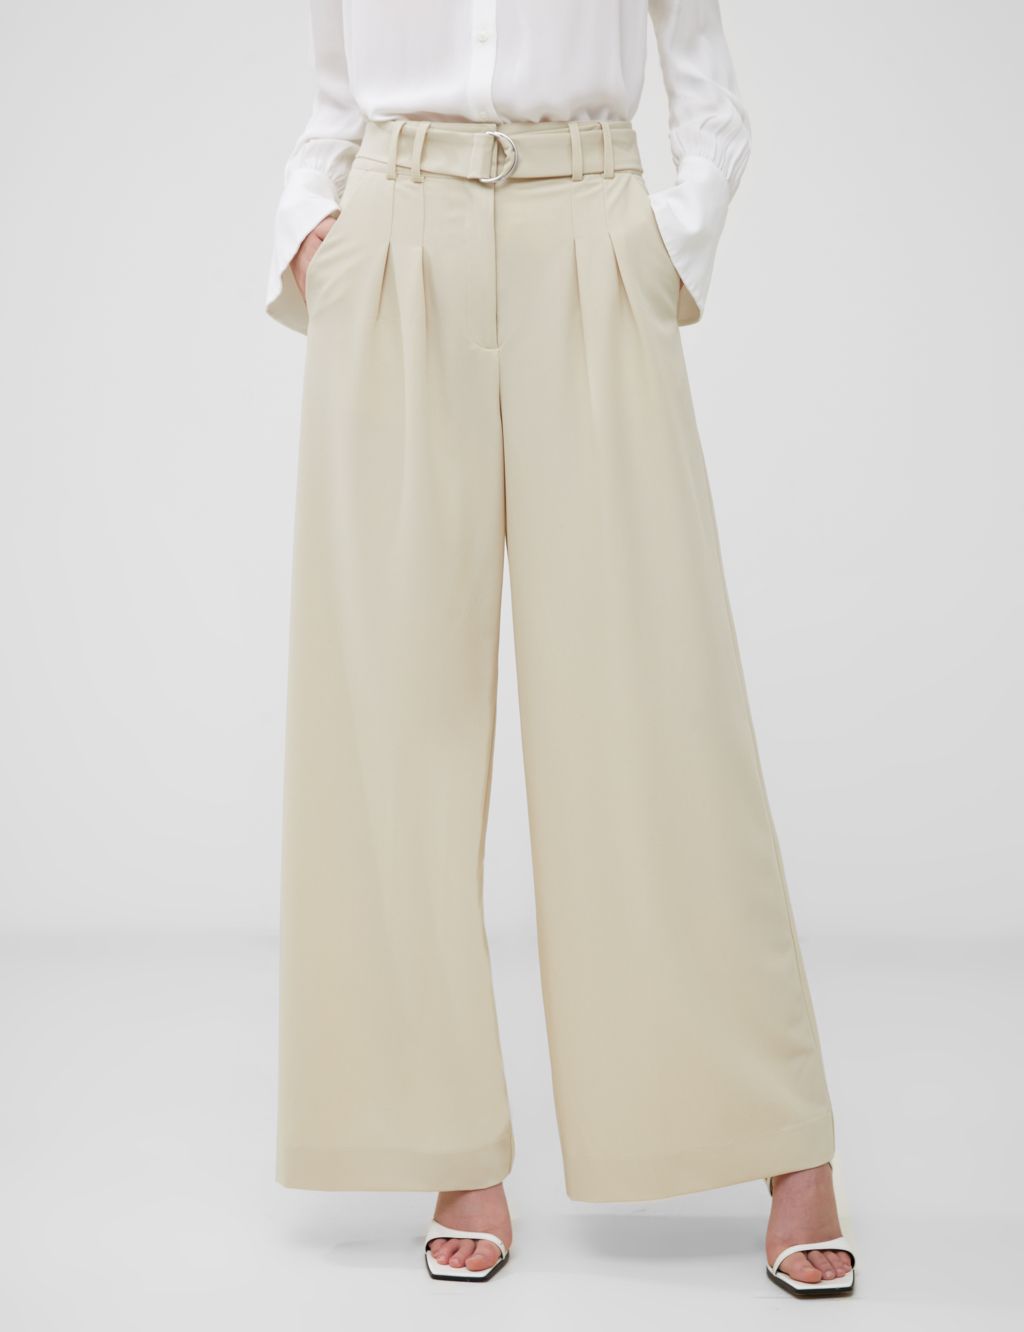 Belted Wide Leg Trousers image 3